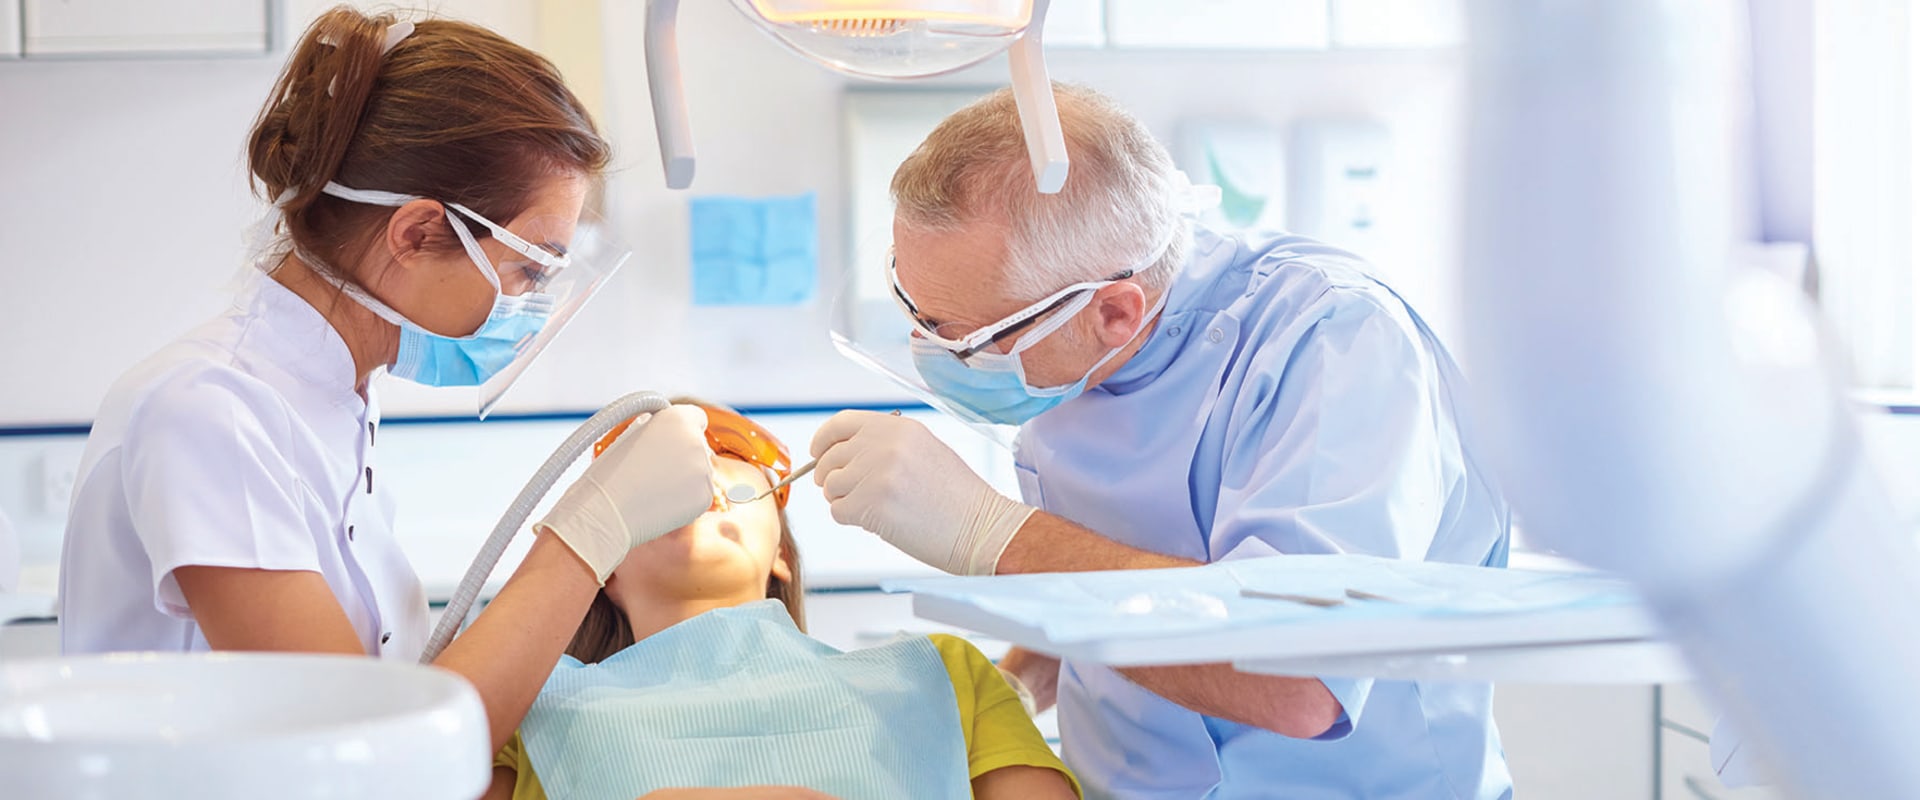 How hard is it to be an endodontist?